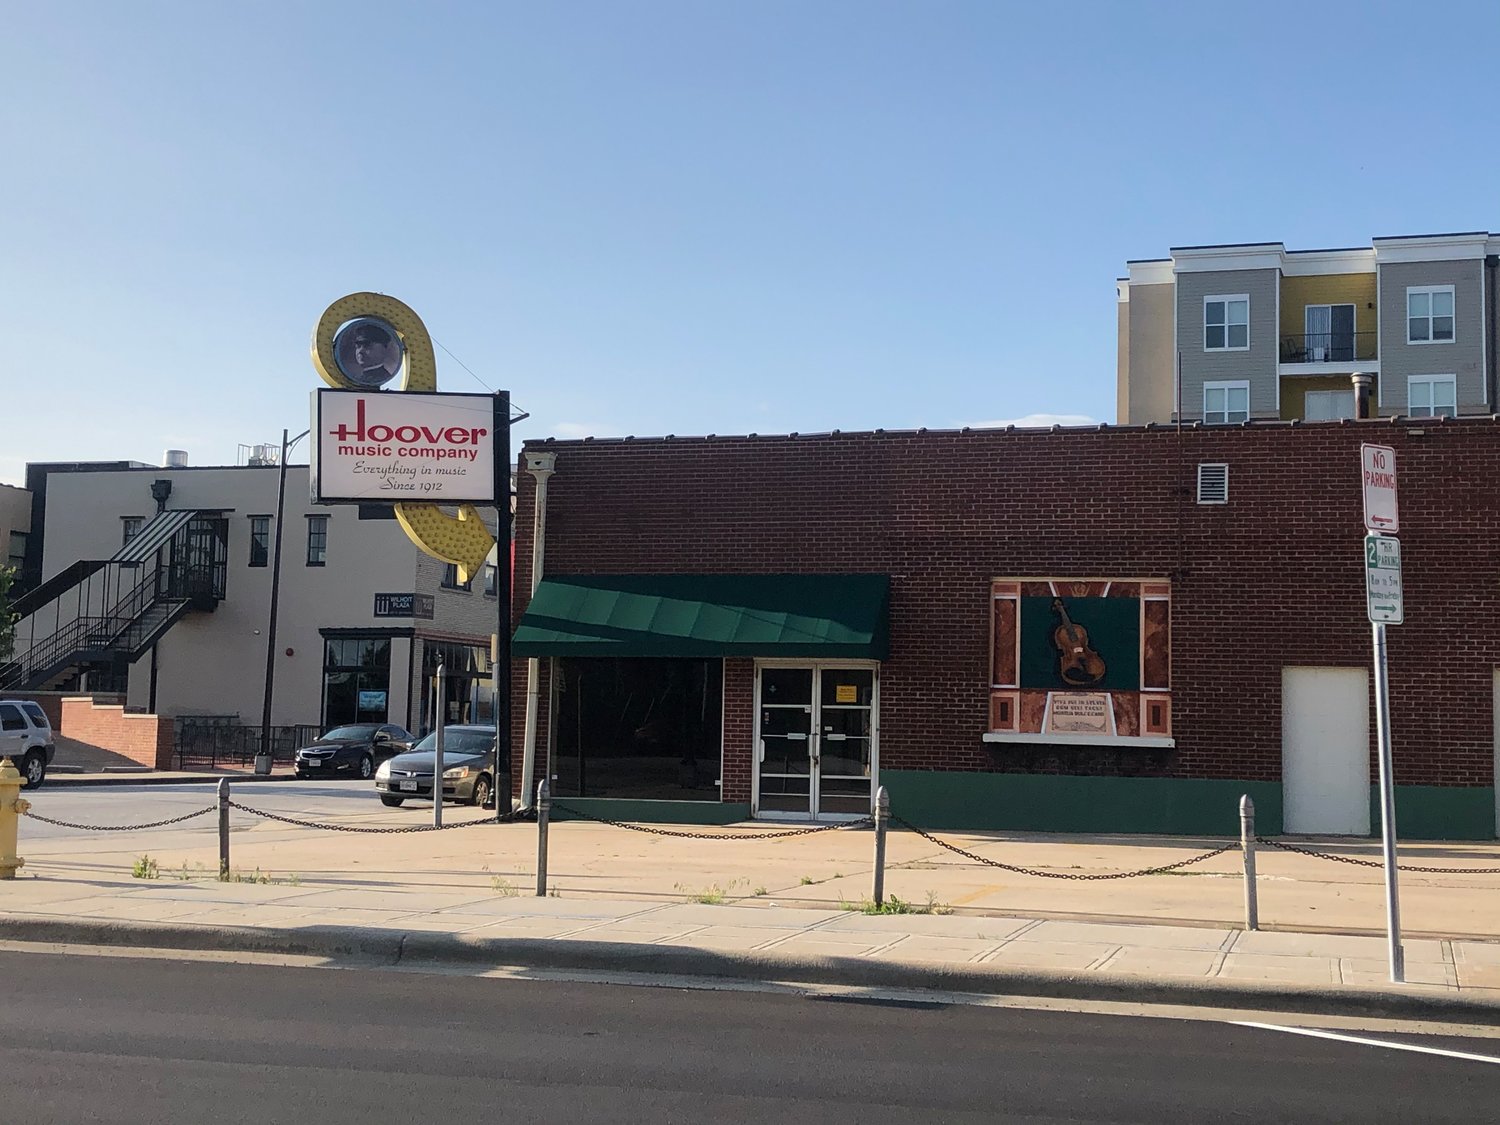 A real estate software firm is planning infill work at the former Hoover Music Co. store at 440 S. Jefferson Ave.